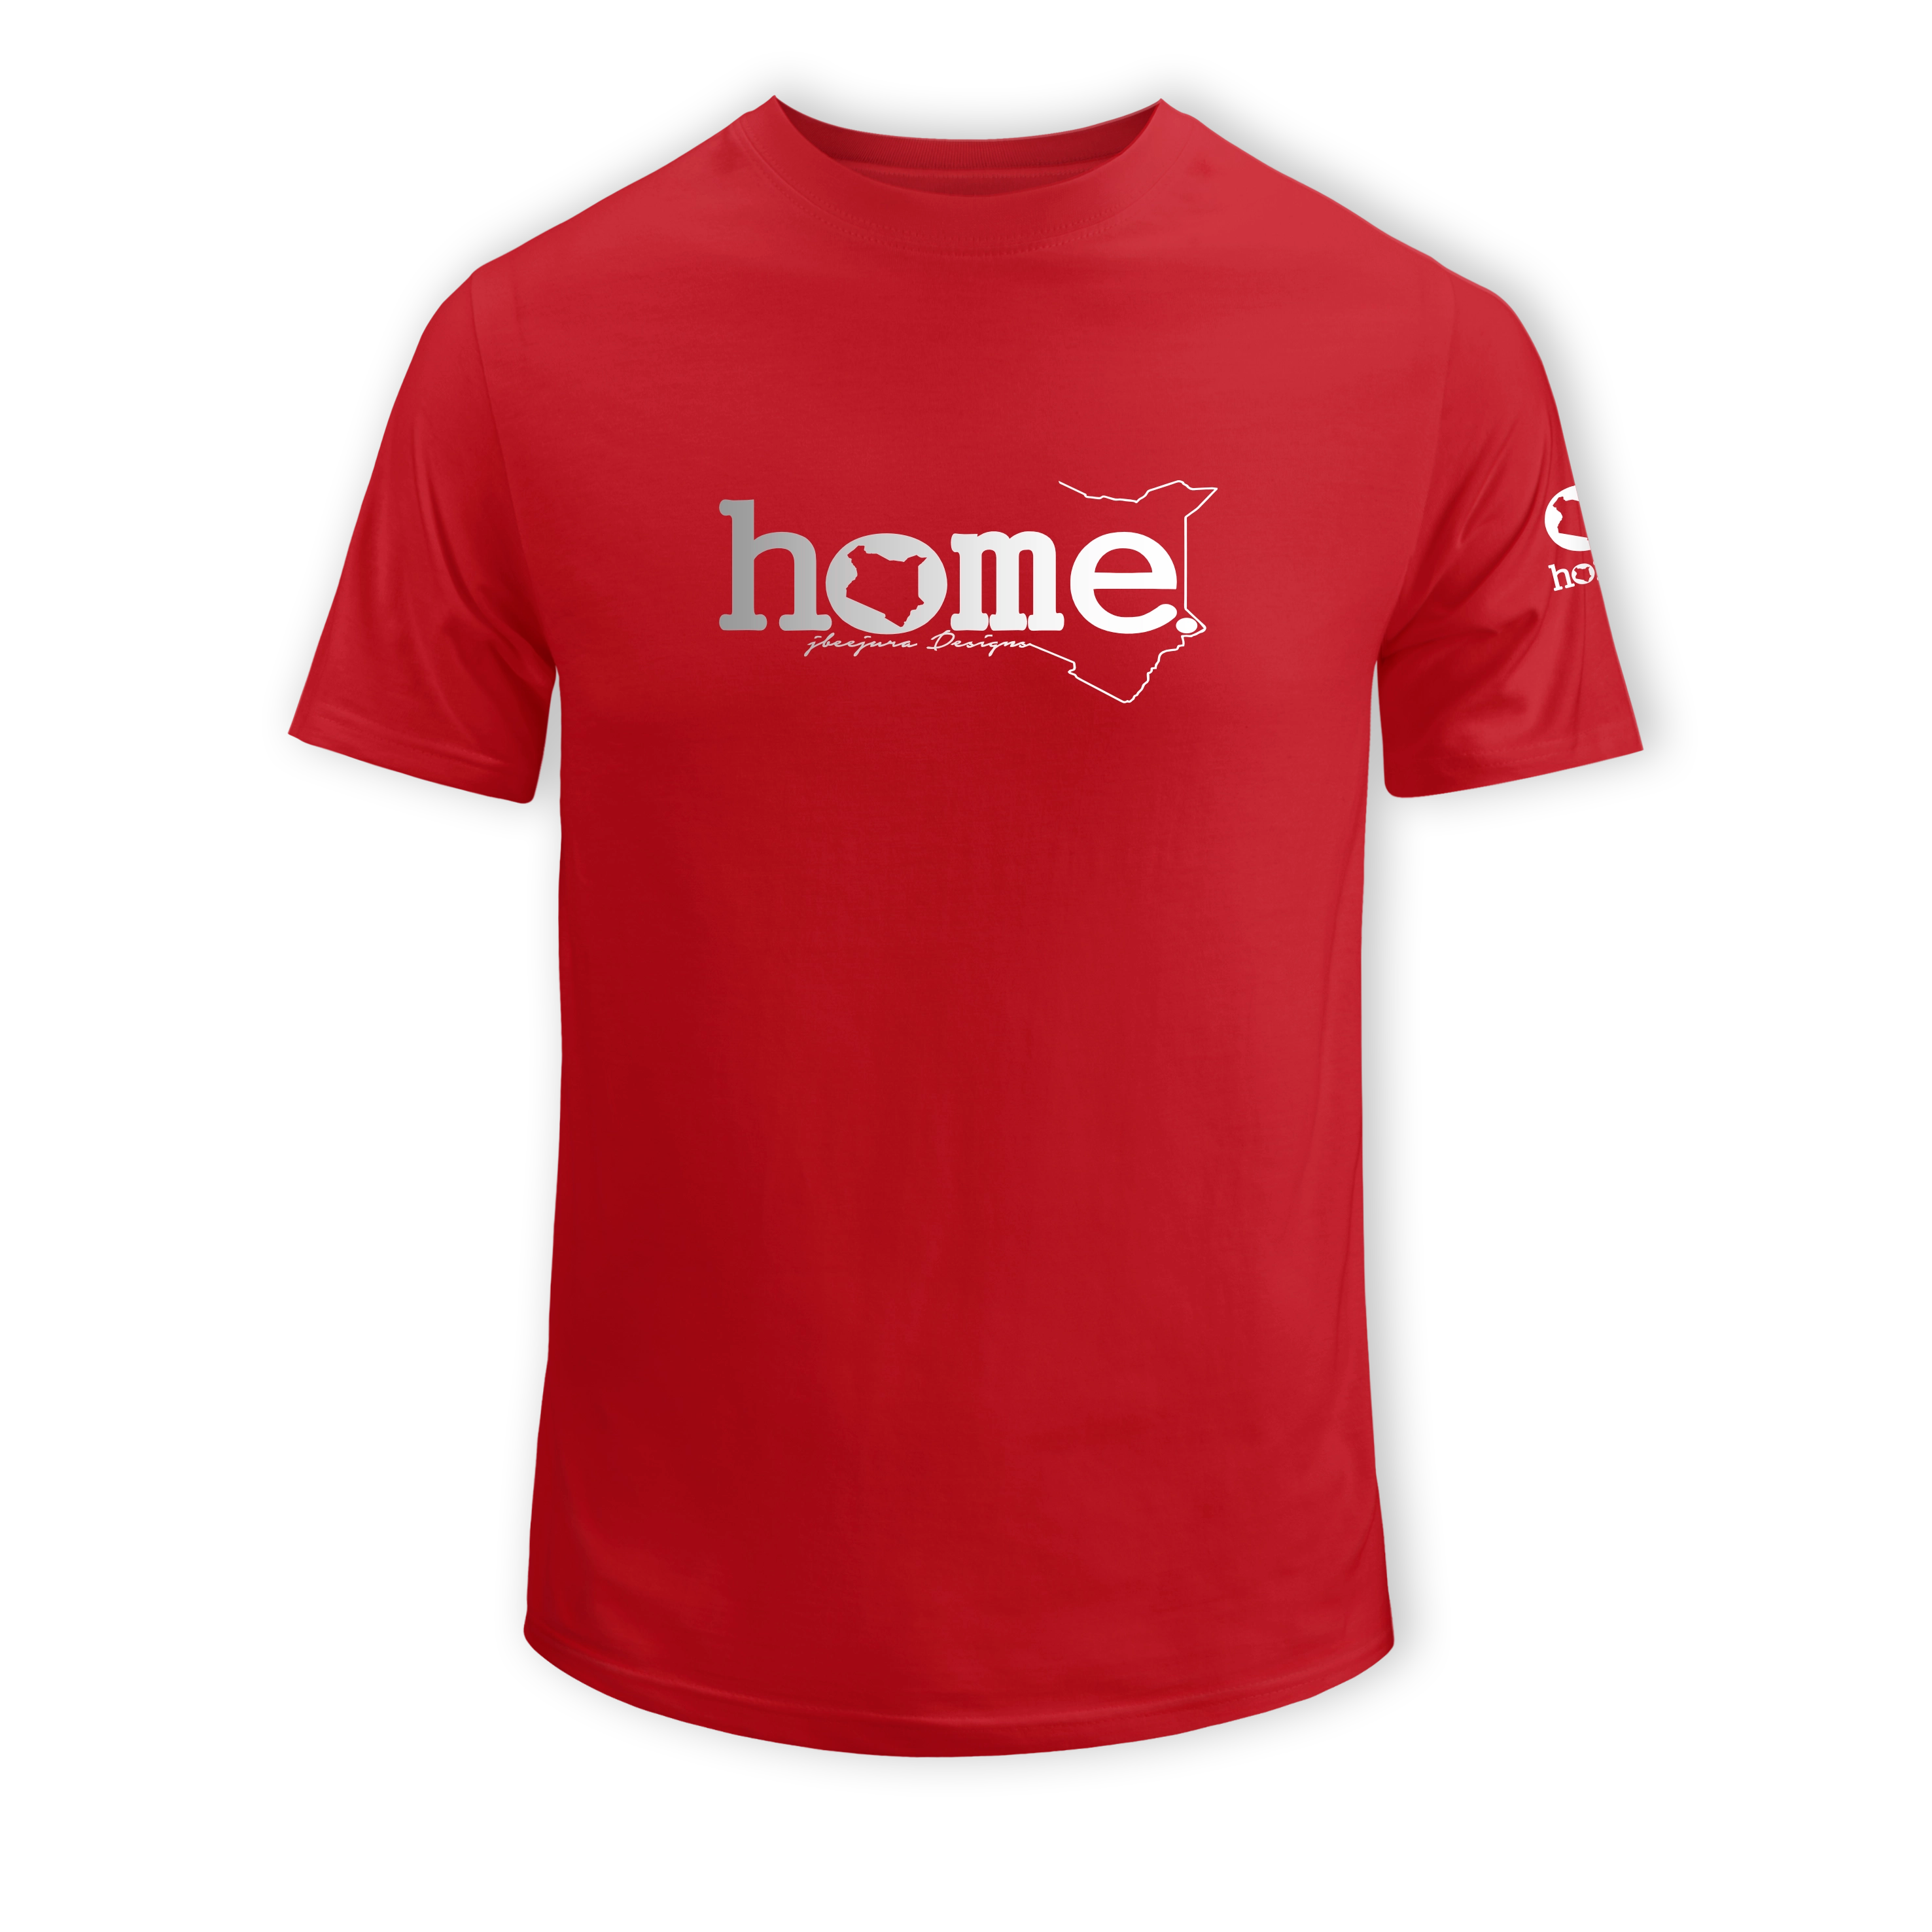 home_254 SHORT-SLEEVED RED T-SHIRT WITH A SILVER CLASSIC WORDS PRINT – COTTON PLUS FABRIC